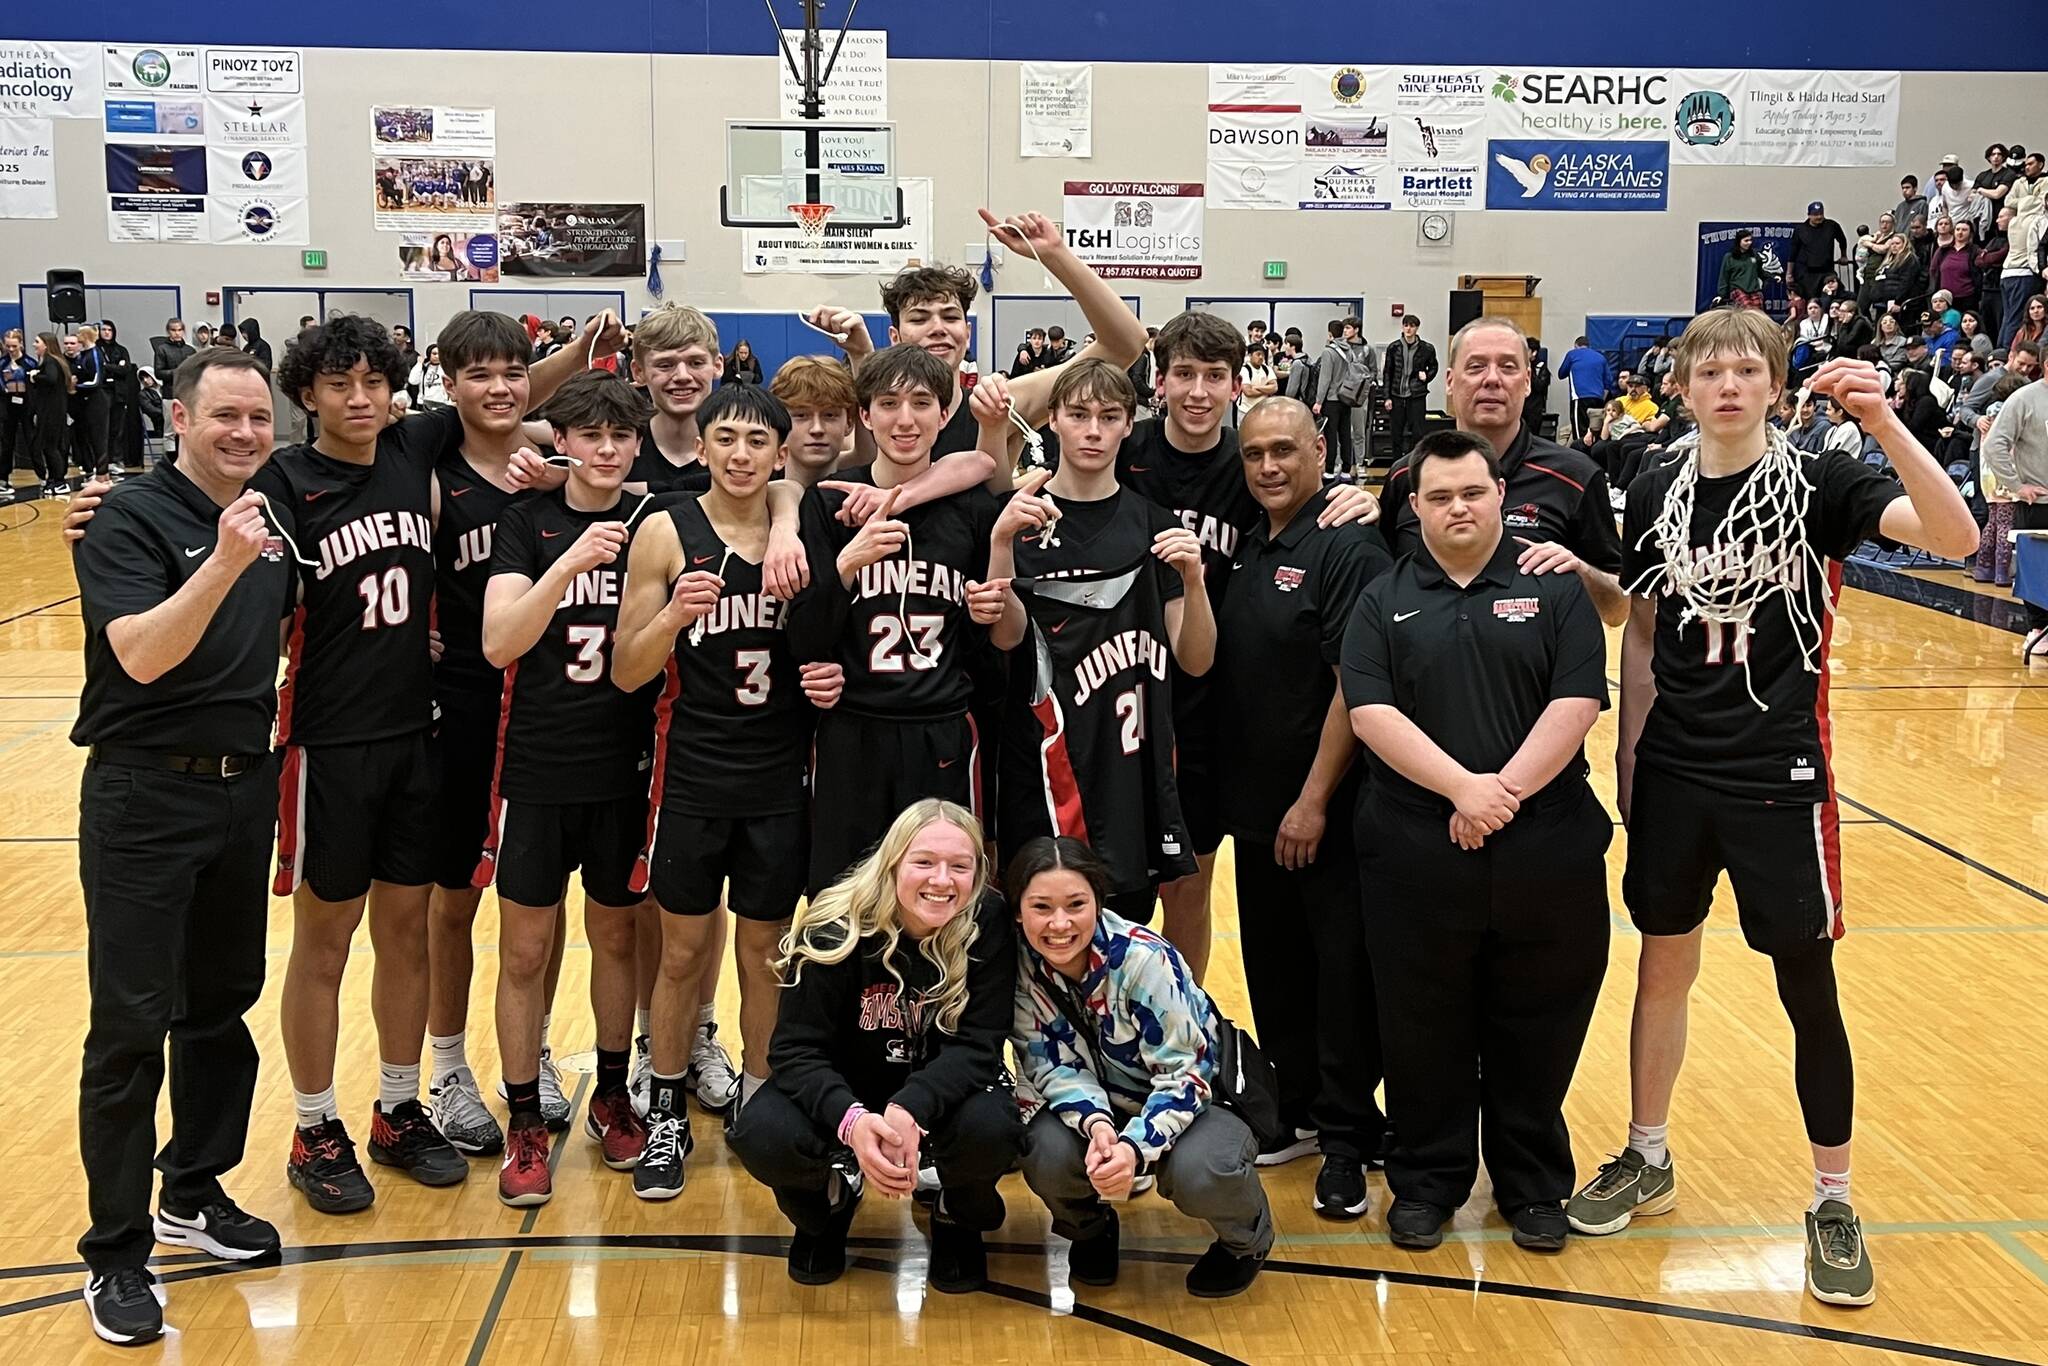 The JDHS Crimson Bears basketball team poses for a victory photo after the net cutting ceremony on Saturday. The Bears beat Ketchikan High School in a second tournament game, securing the team’s spot at state. (Jonson Kuhn / Juneau Empire)